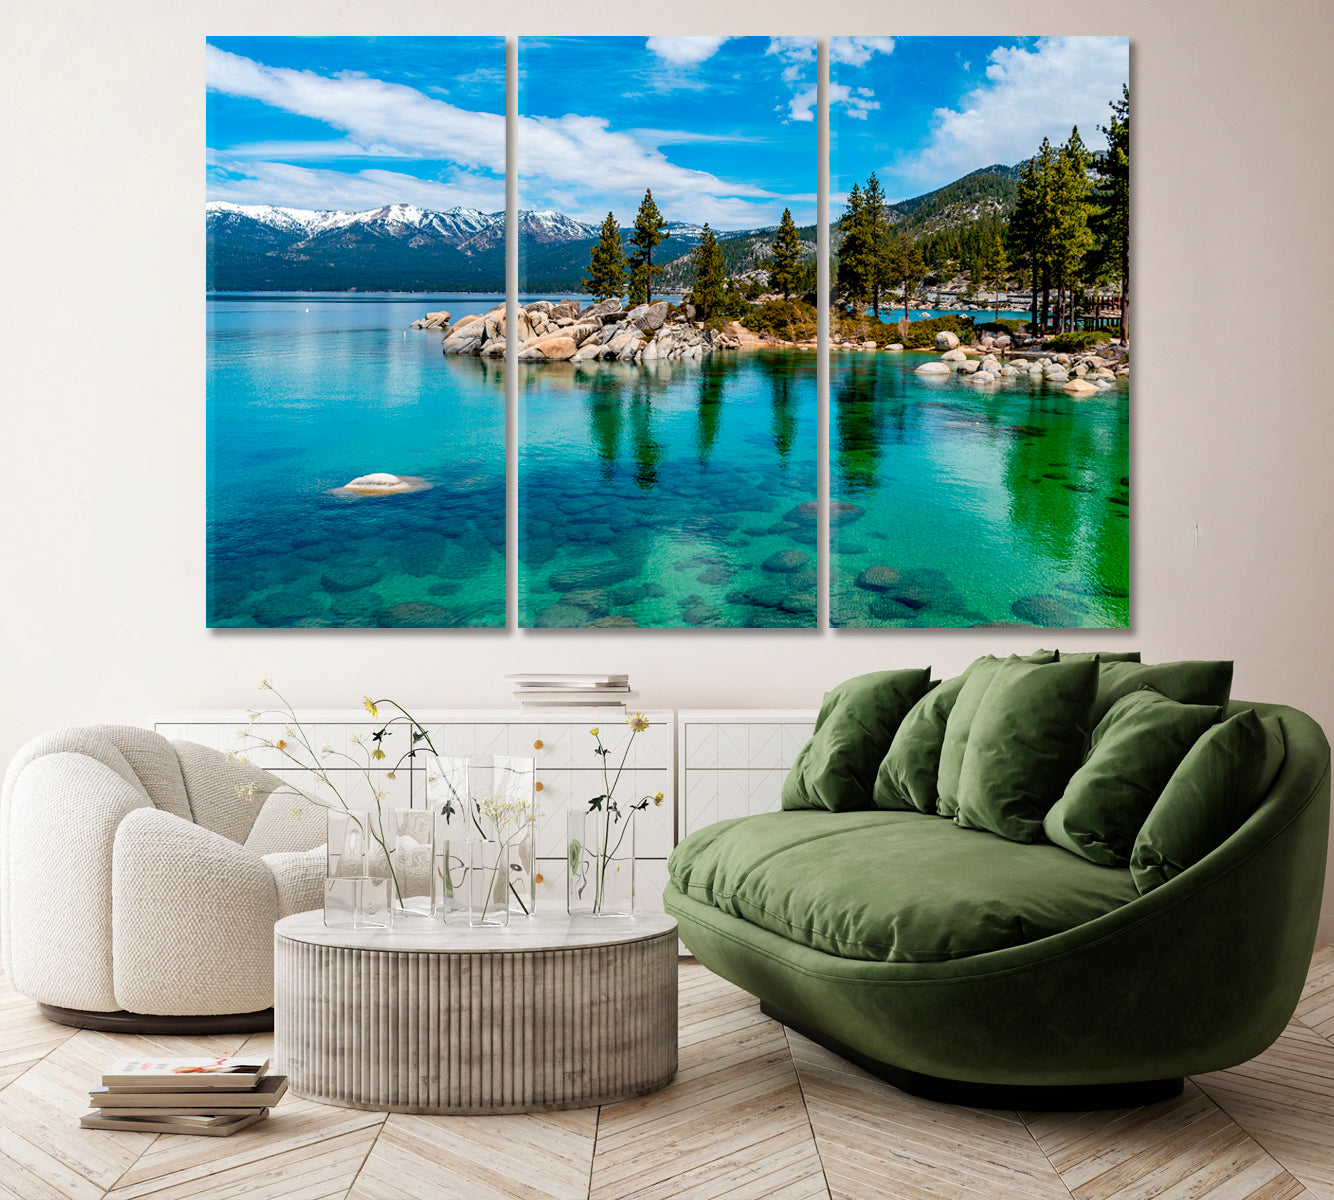 Lake Tahoe United States Canvas Print ArtLexy 3 Panels 36"x24" inches 